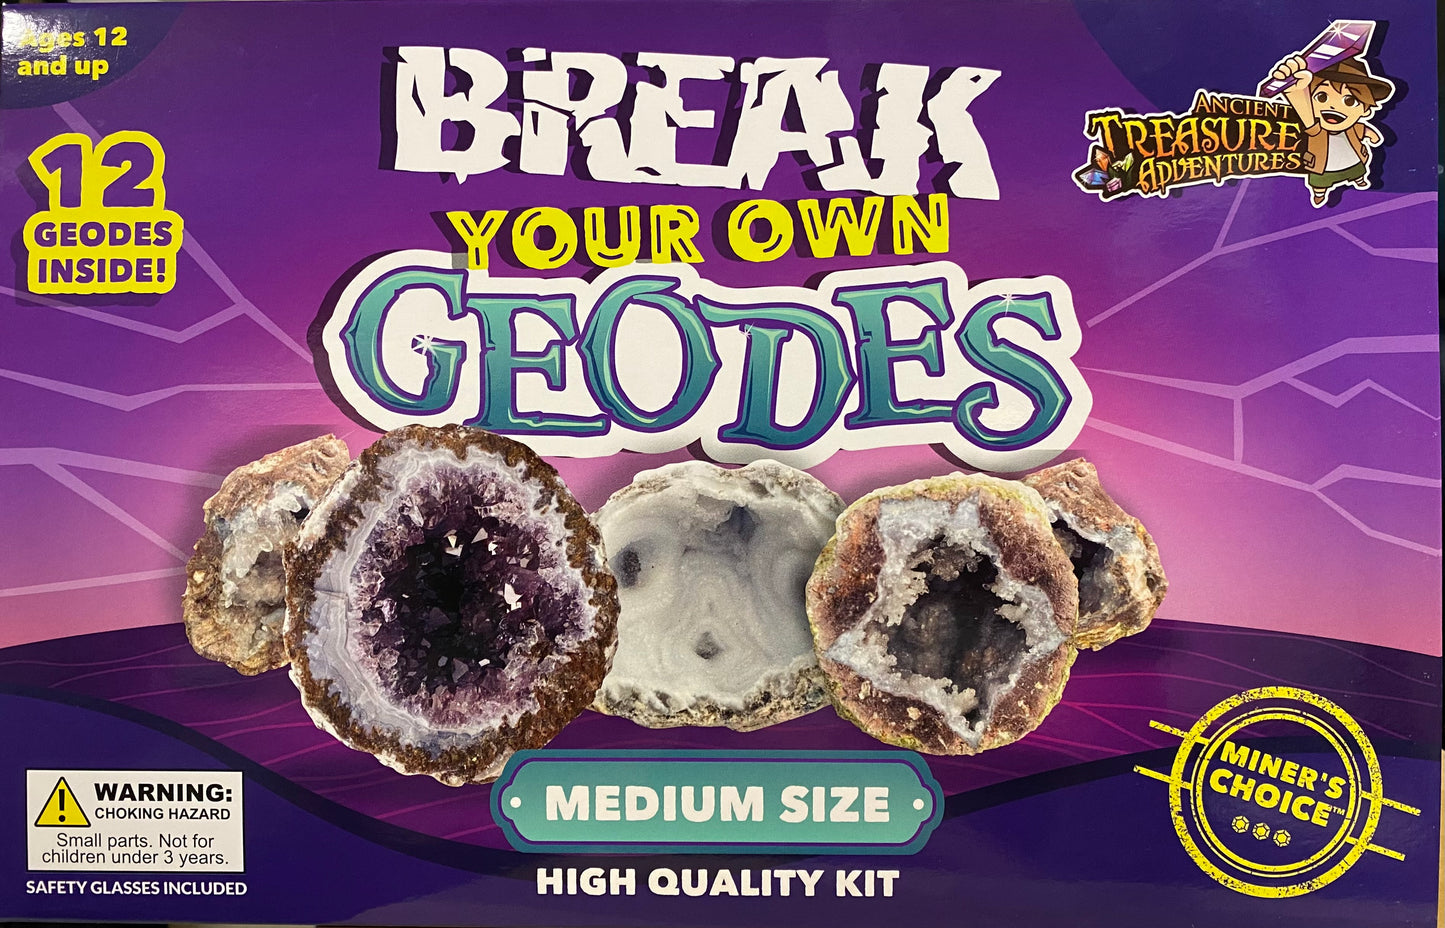 Break Your Own Geodes Kit 12 Whole Medium Size Geodes Miners Choice!